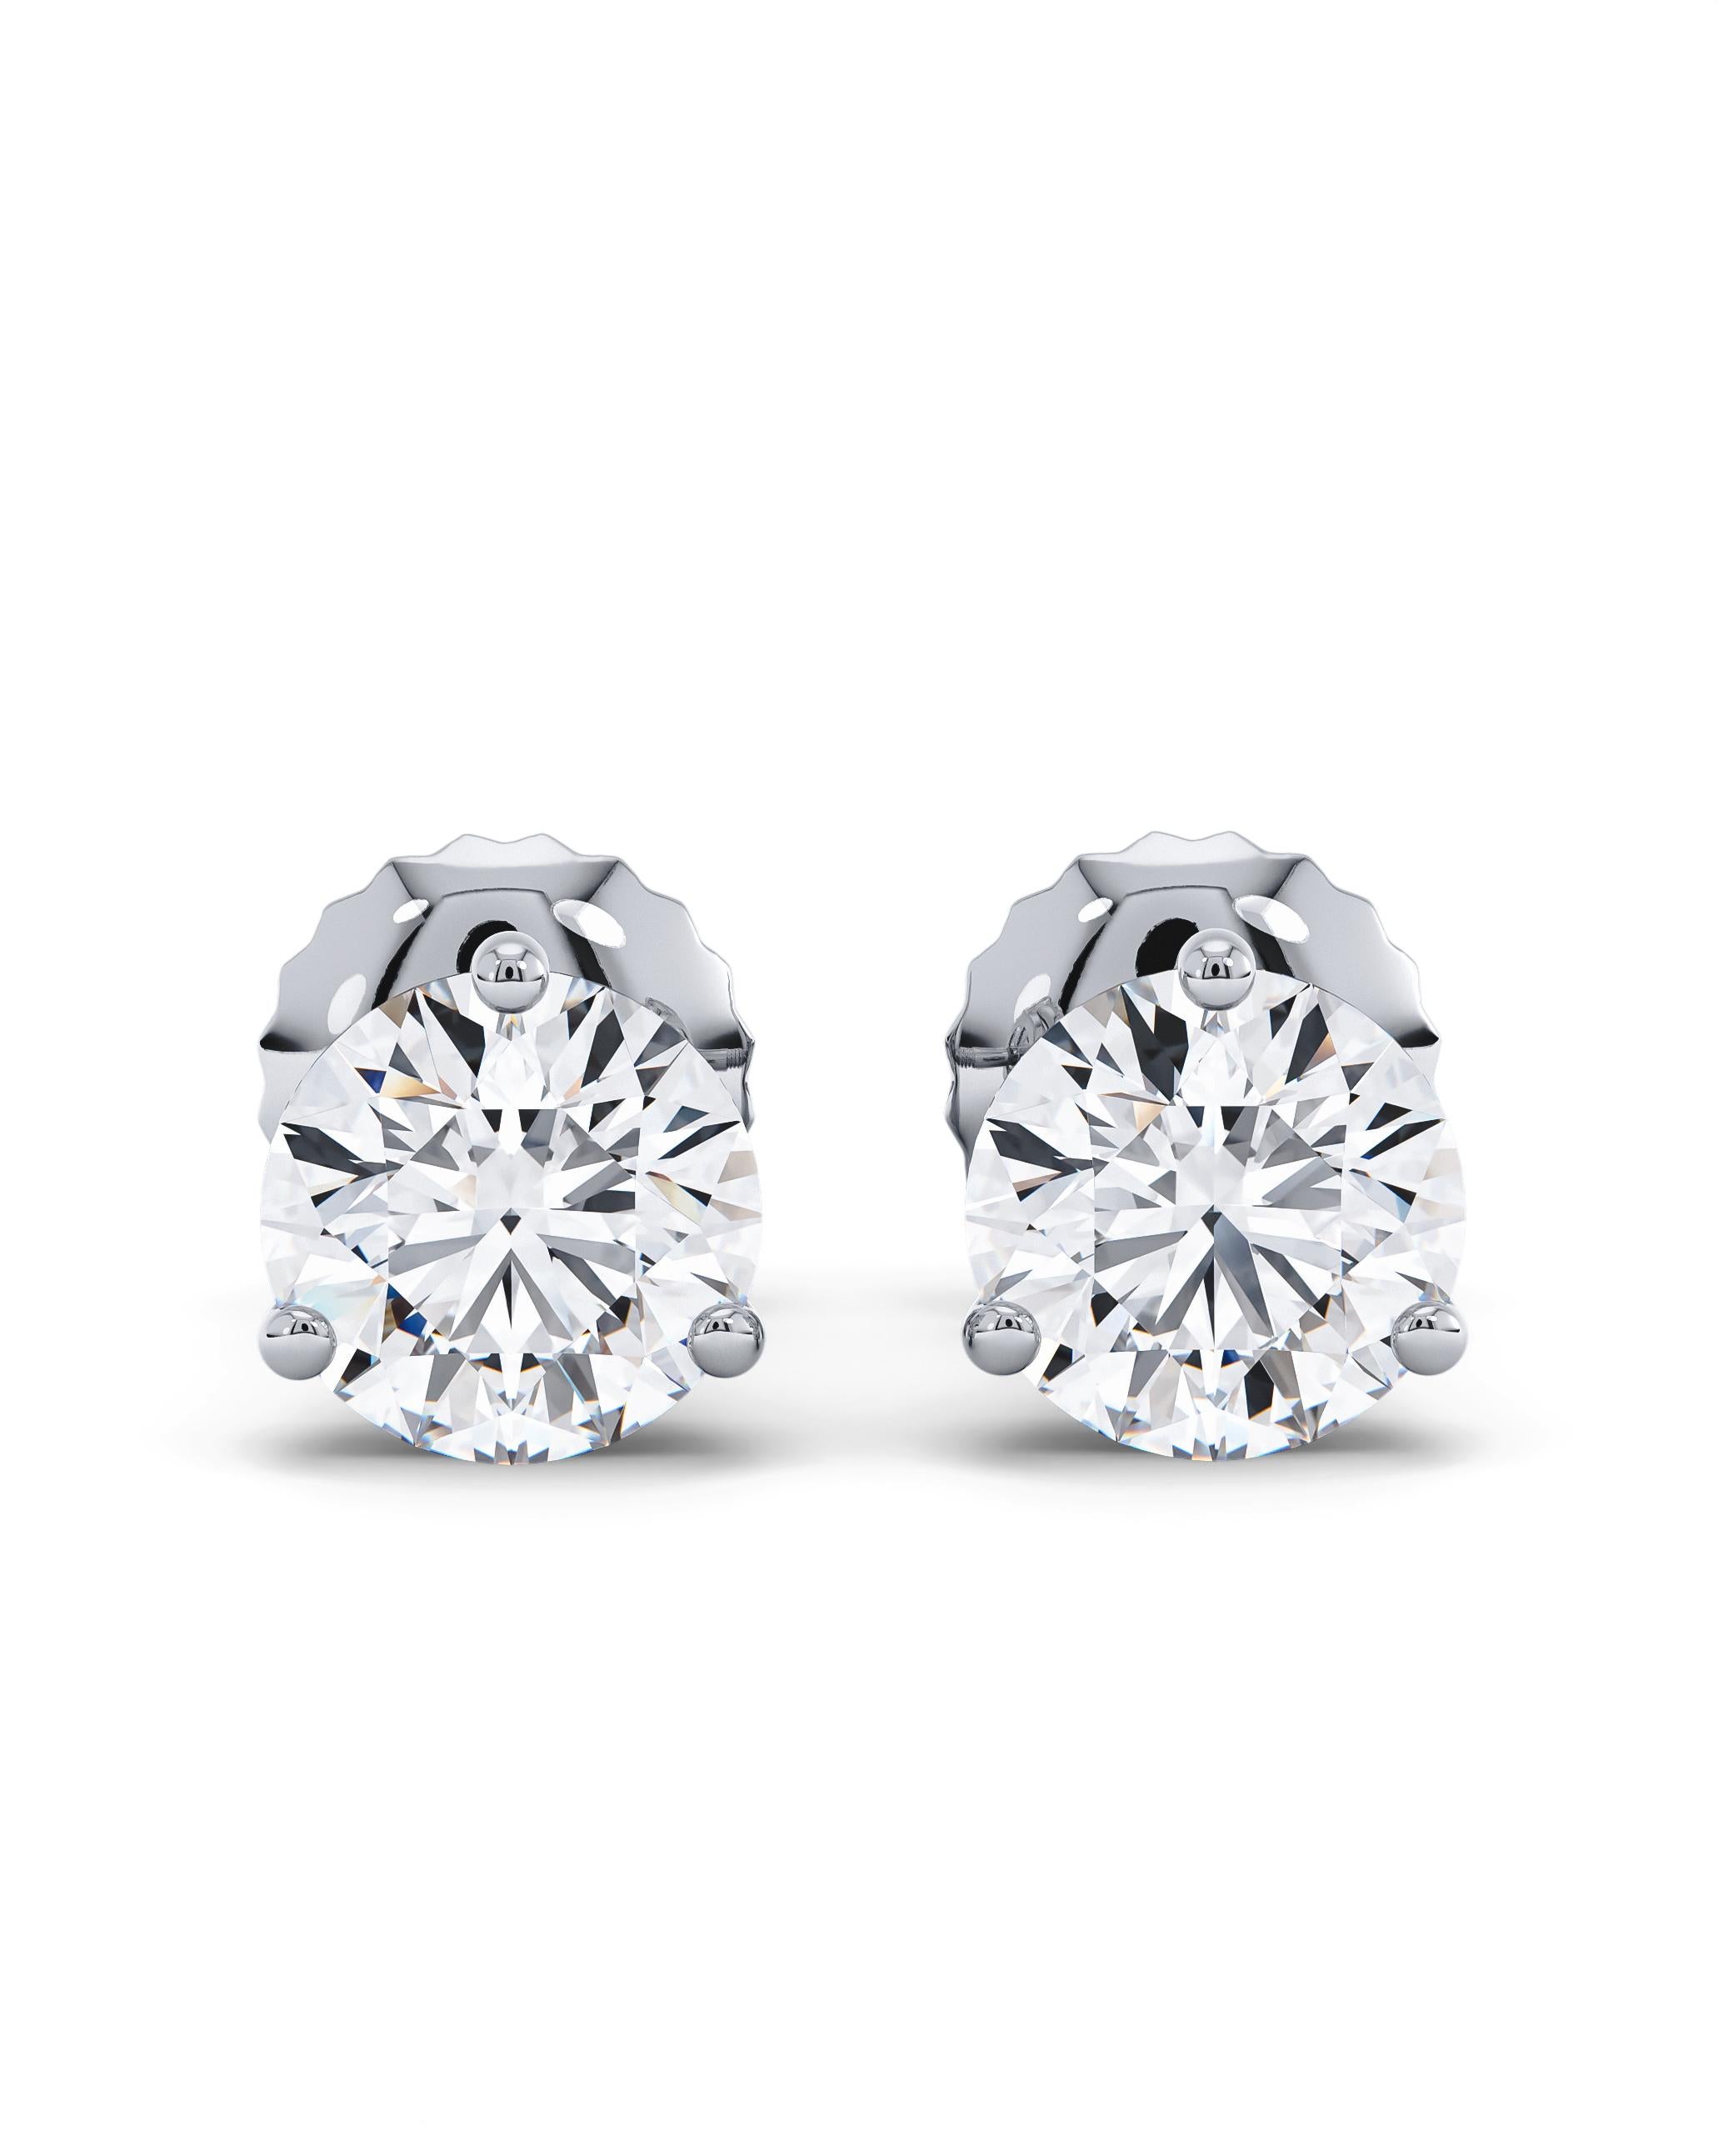 3 Carat Total Diamond Weight Natural Diamond Stud Earrings with Screwbacks In New Condition For Sale In New York, NY